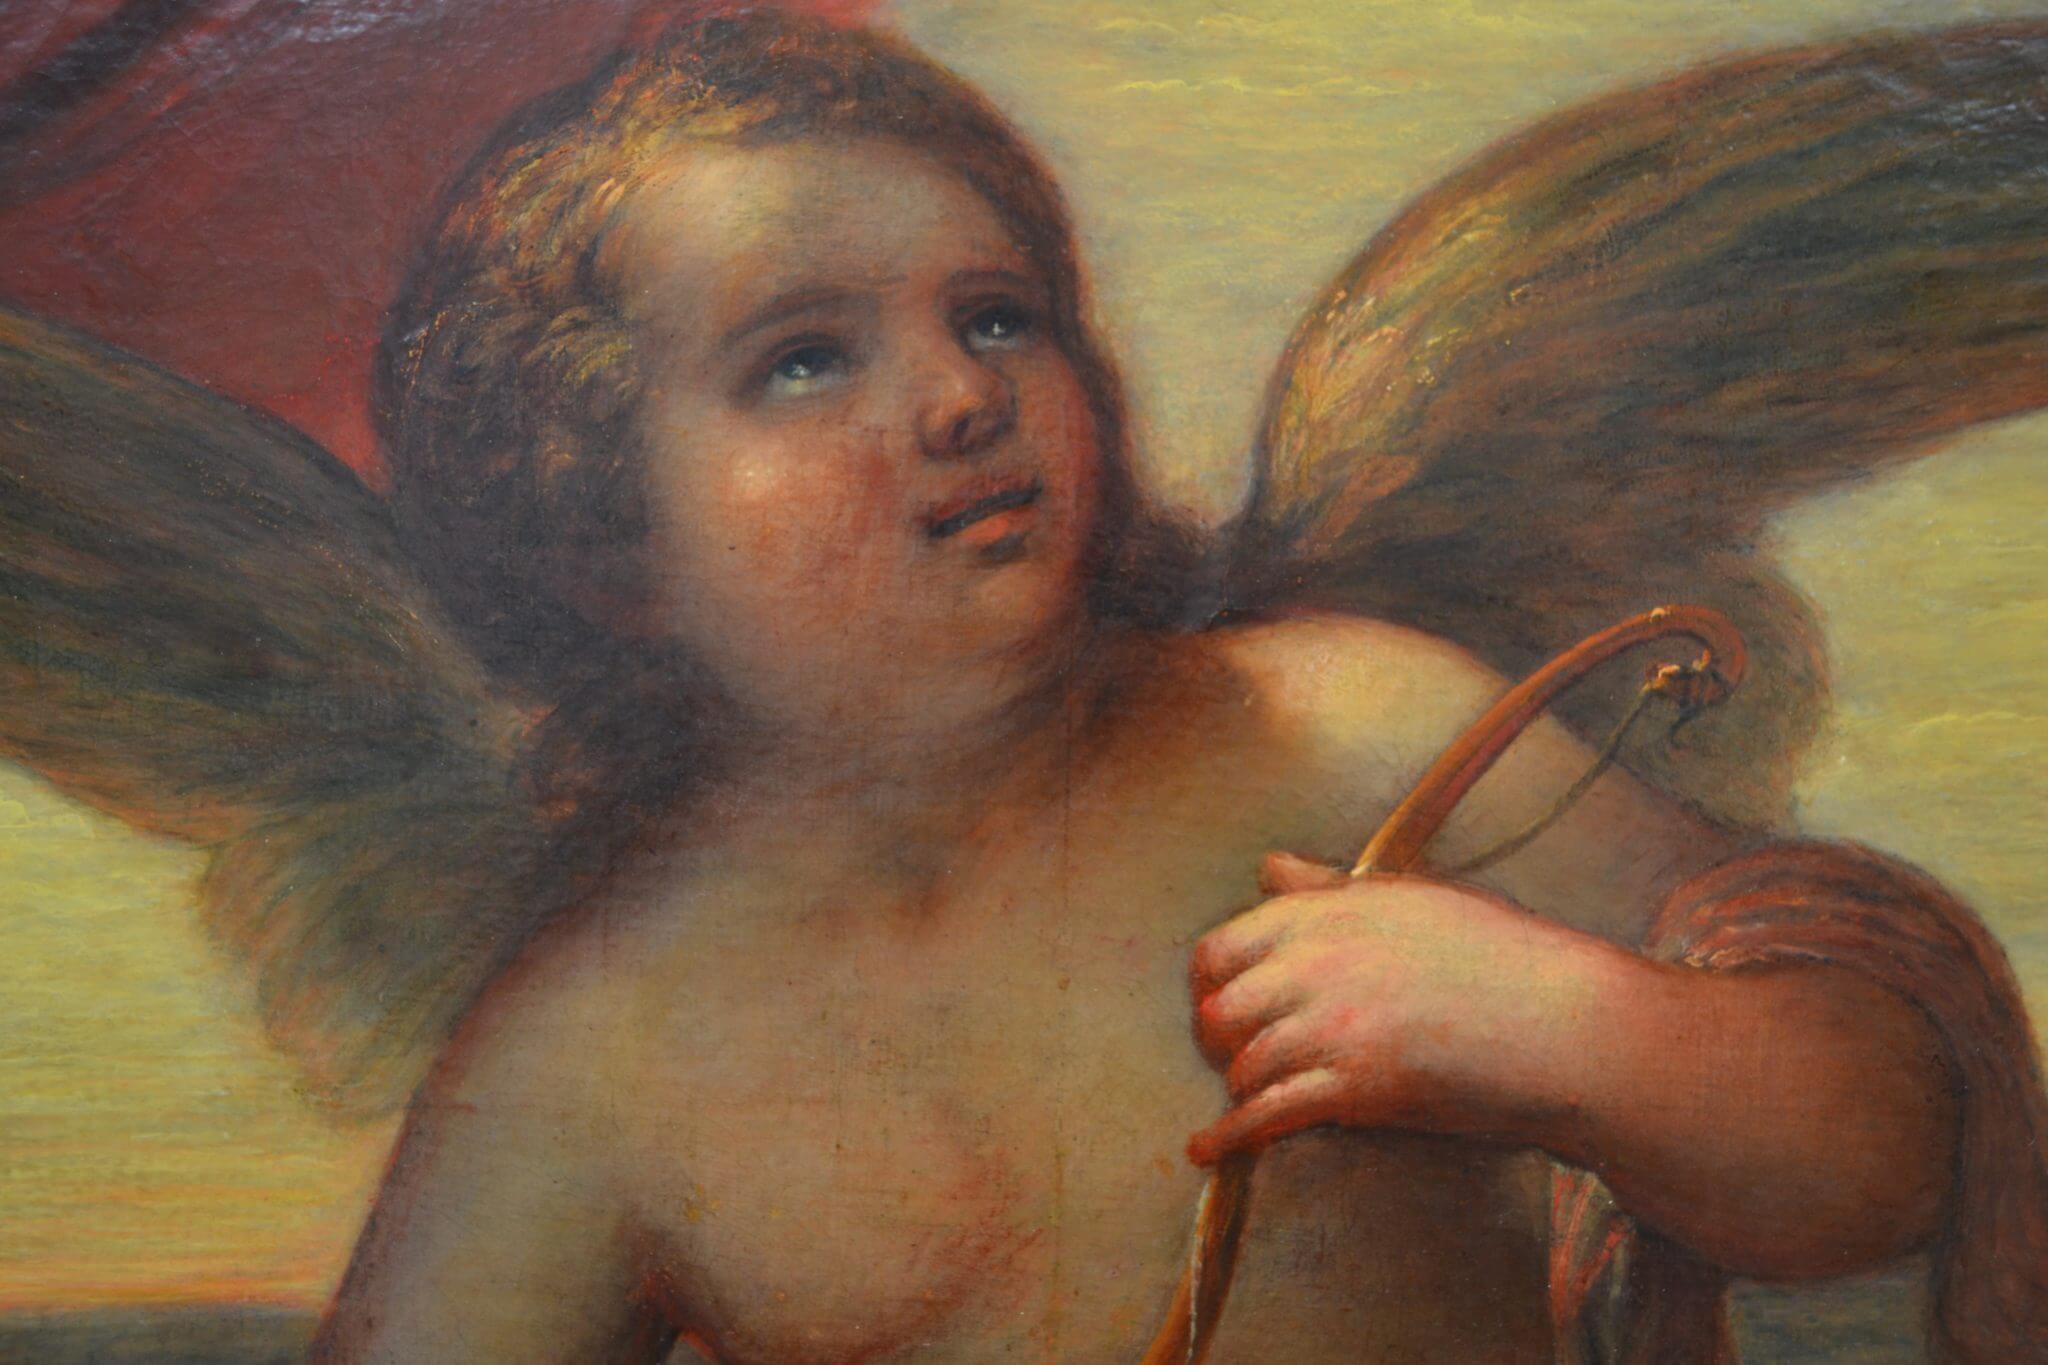 A fine and rare painting of a kneeling cupid holding a quiver and shown against an idyllic background. The style and subject matter are similar to works by Venetian masters from the 16th through 17th century. Restorers indicate that this painting